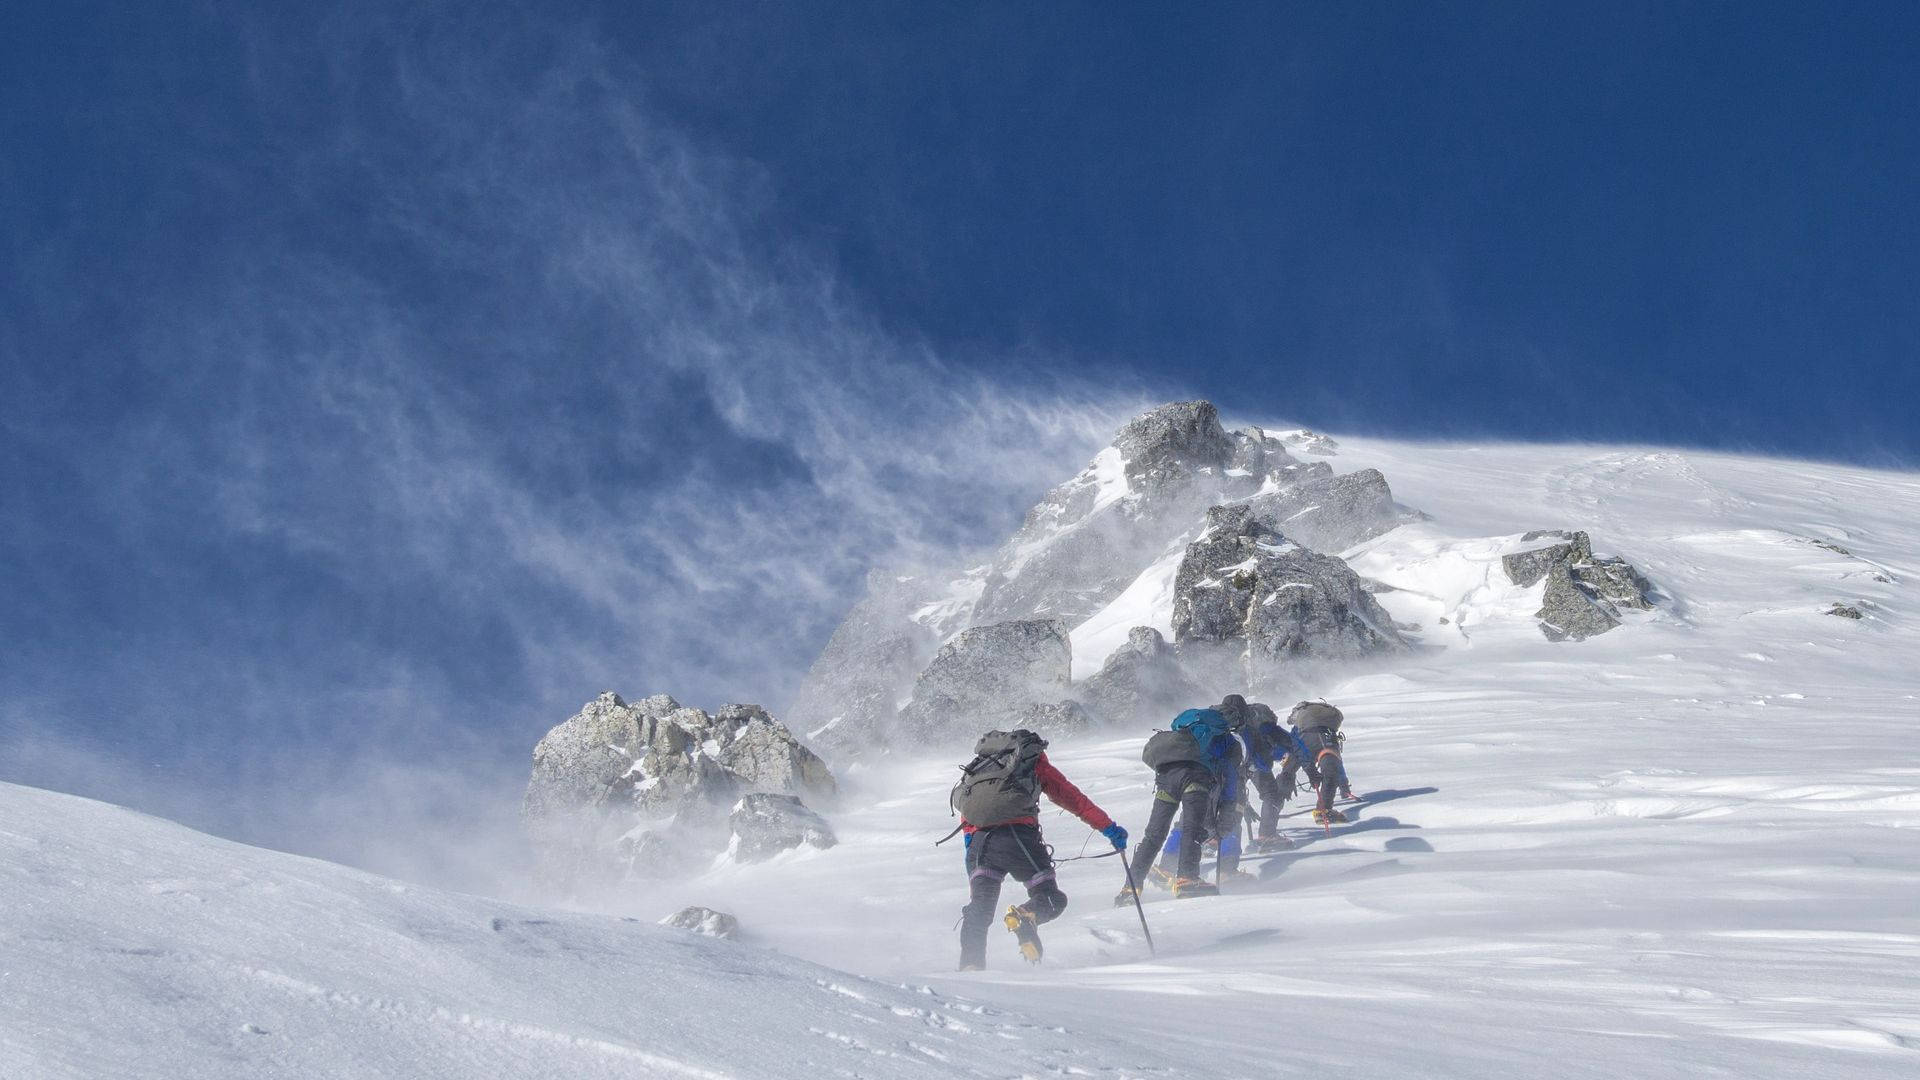 Climbing Group On Snowy Mountain Background